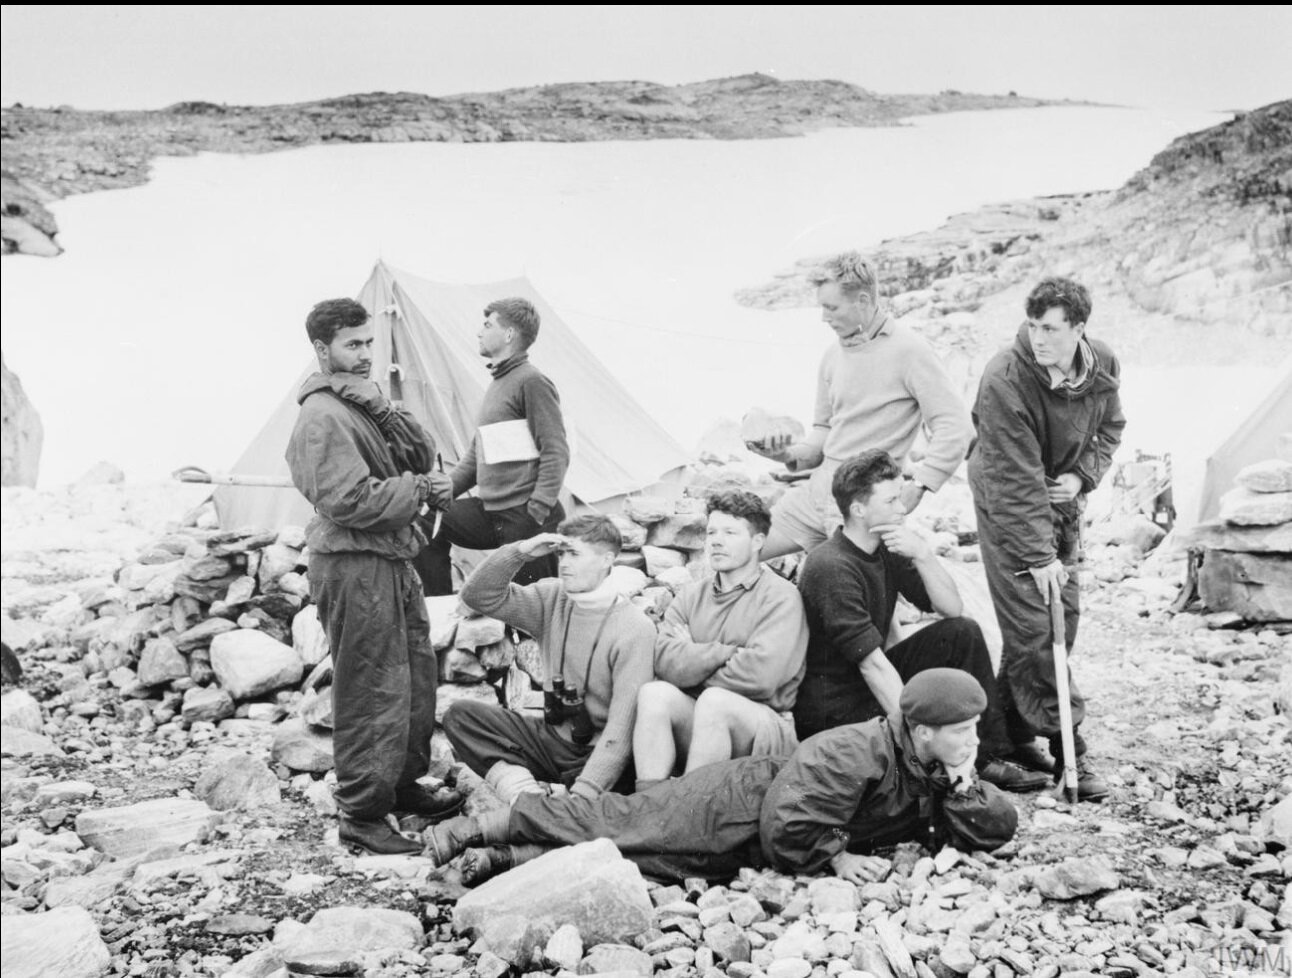 SERVICES SCIENTIFIC EXPEDITION TO NORWAY. SEPTEMBER 1958, ODDA, NORWAY, THE ROYAL NAVY'S EXPEDITION UNDERTAKING METEOROLOGICAL AND OTHER SCIENTIFIC WORK IN THE AREA..jpg